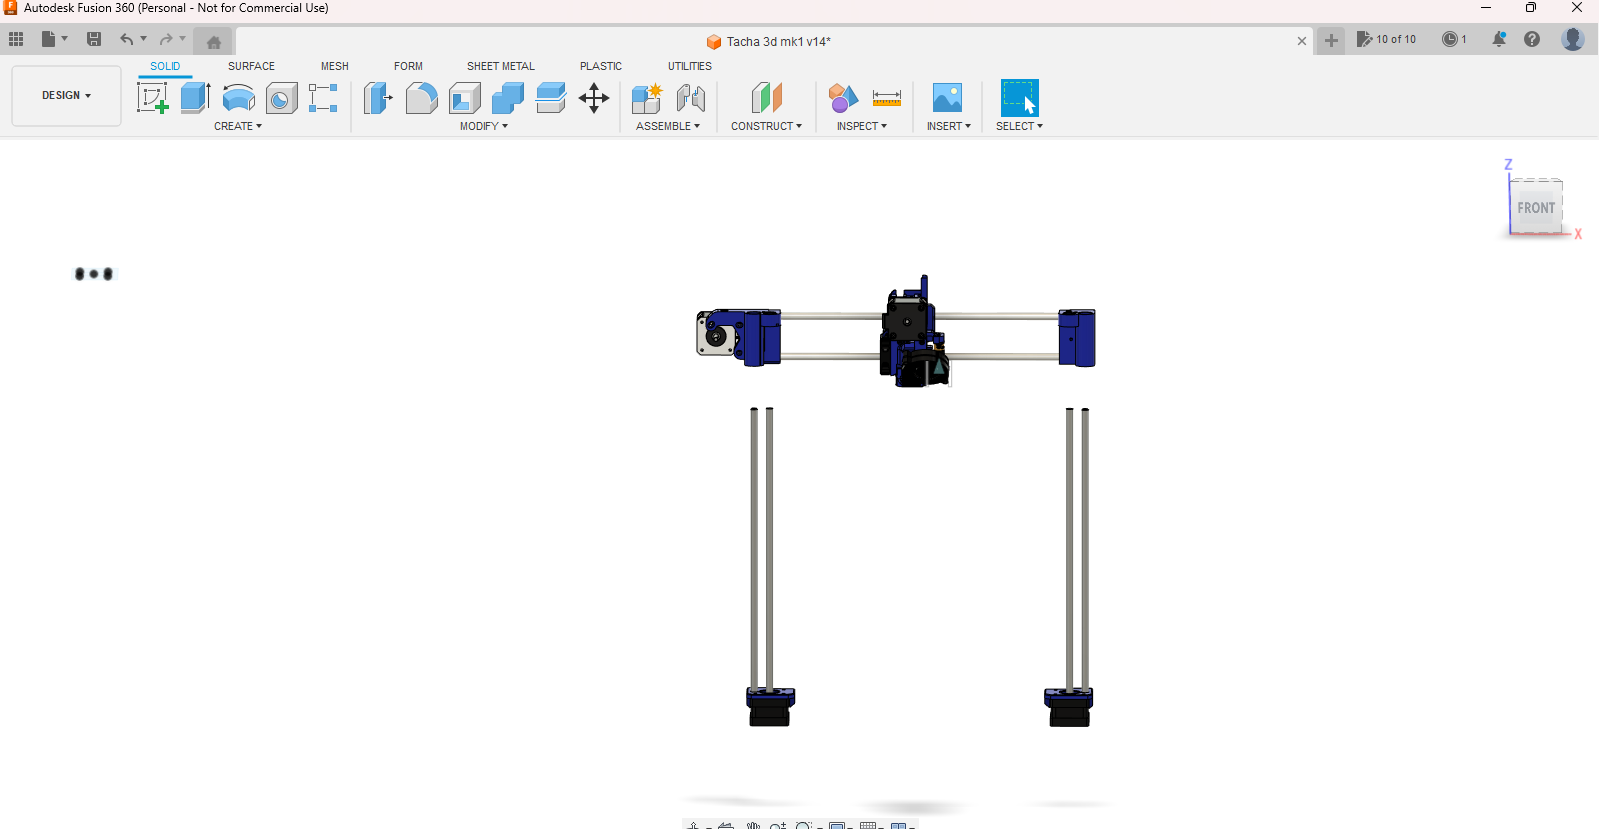 Autodesk Fusion 360 (Personal - Not for Commercial Use) 6_30_2023 9_19_56 PM.png